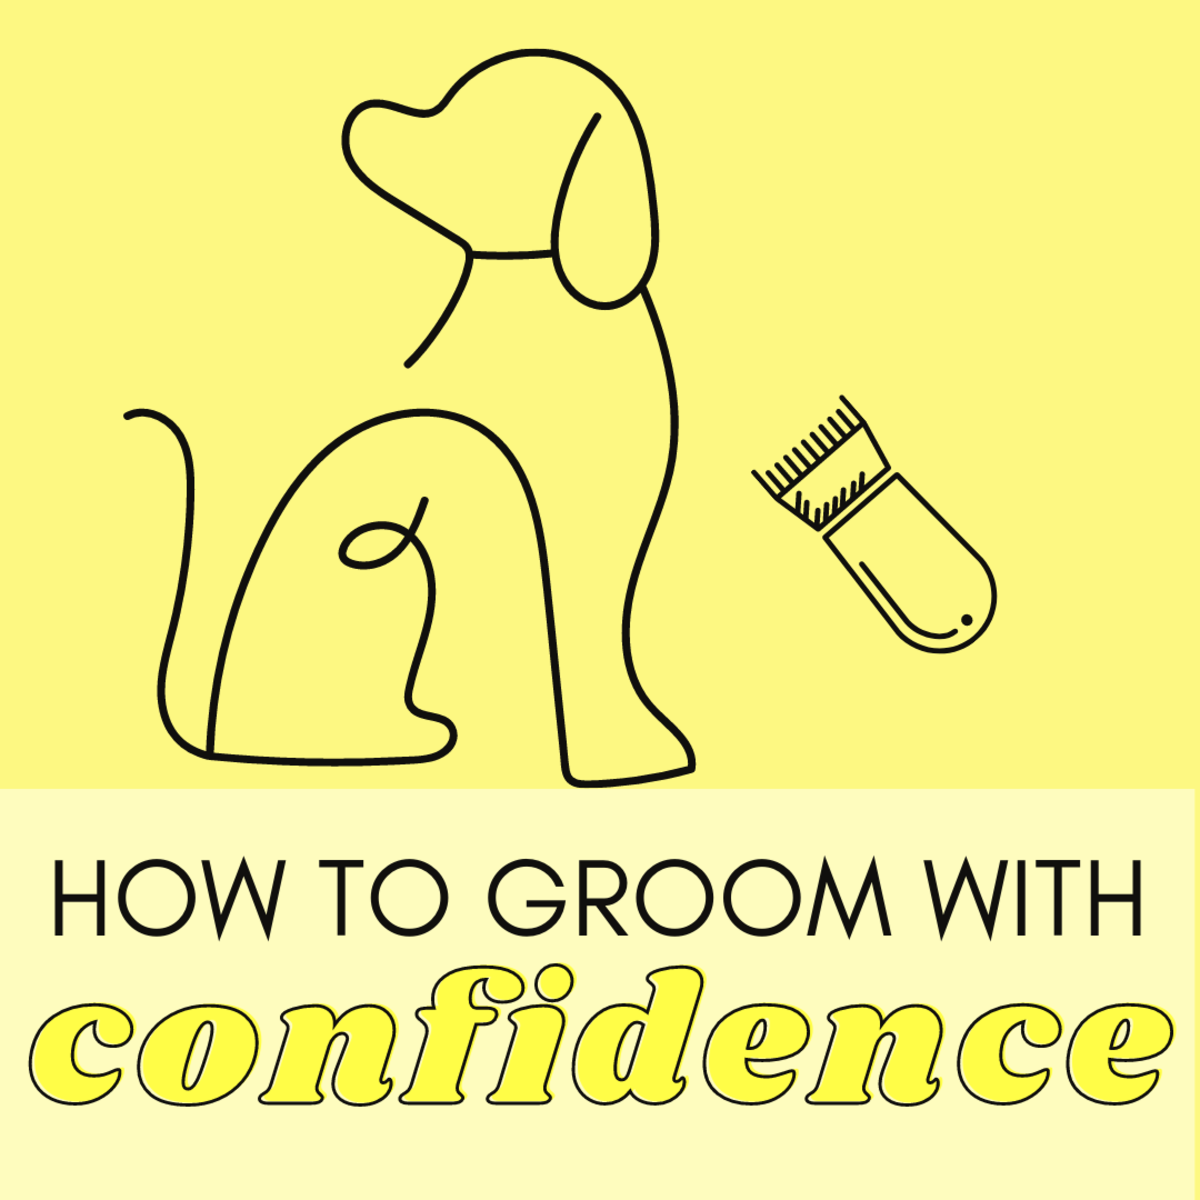 Grooming can be anxiety-inducing at first, but after a while (and some help from tips), you'll be grooming your pup like a pro. 